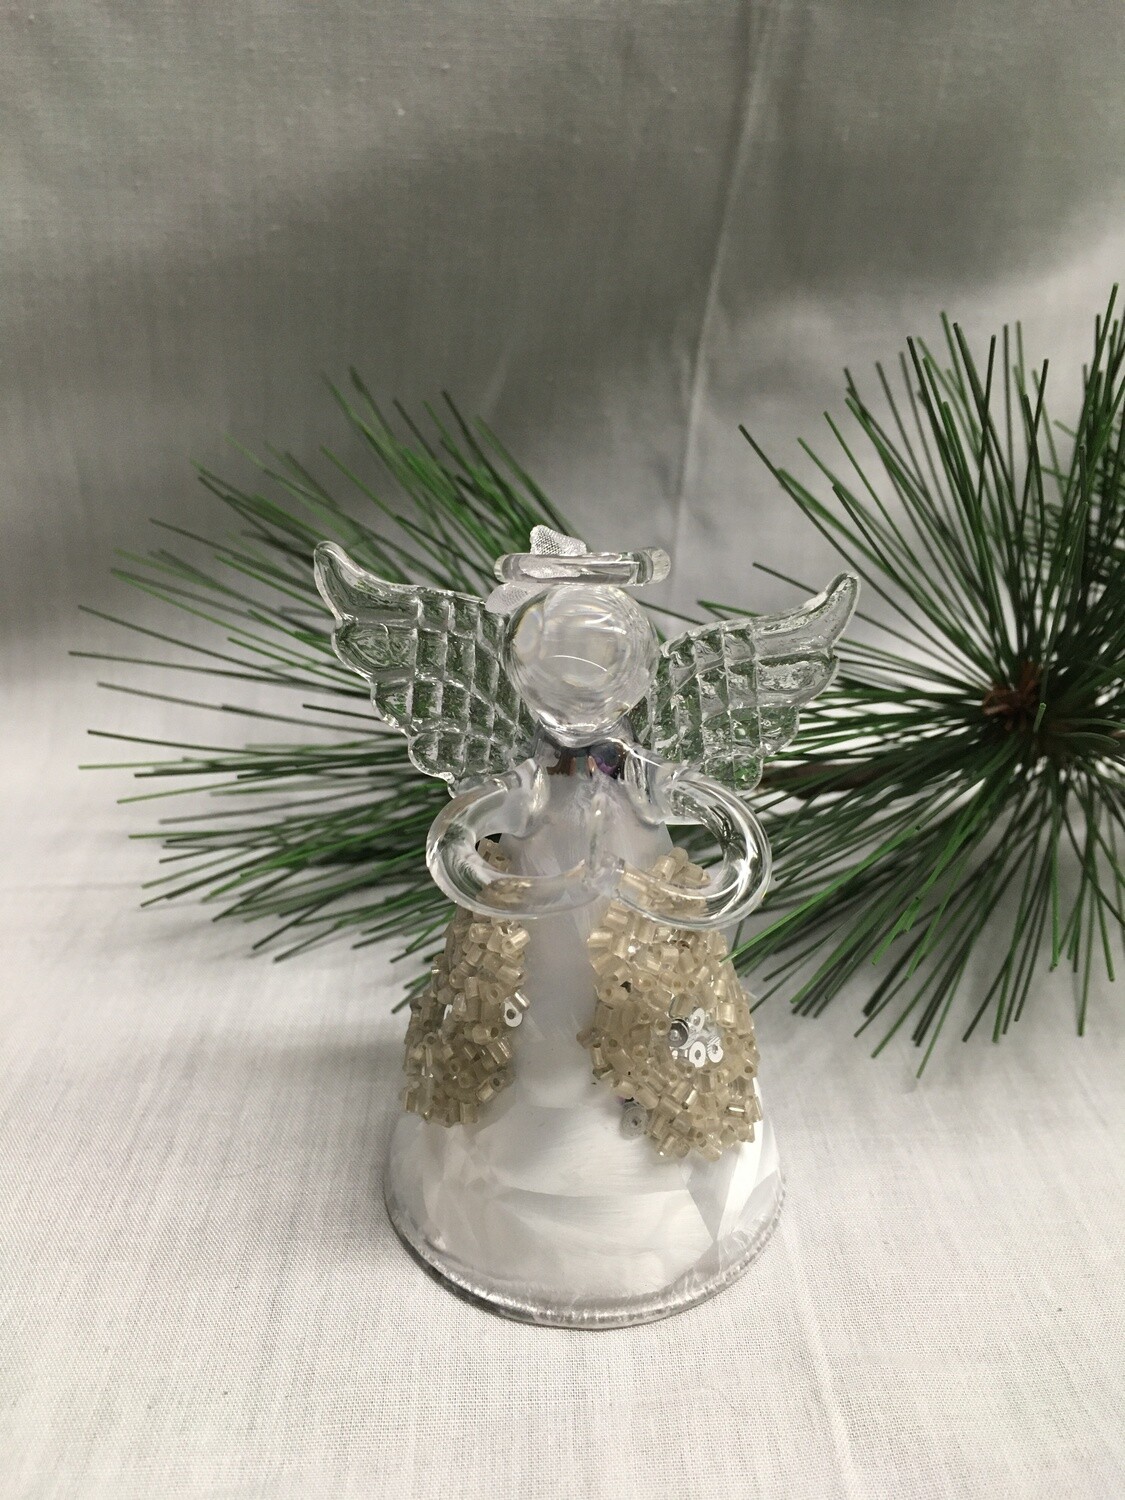 Glass Angel / Fairy Ornament - 3.5" - Frosted Silver with Beads